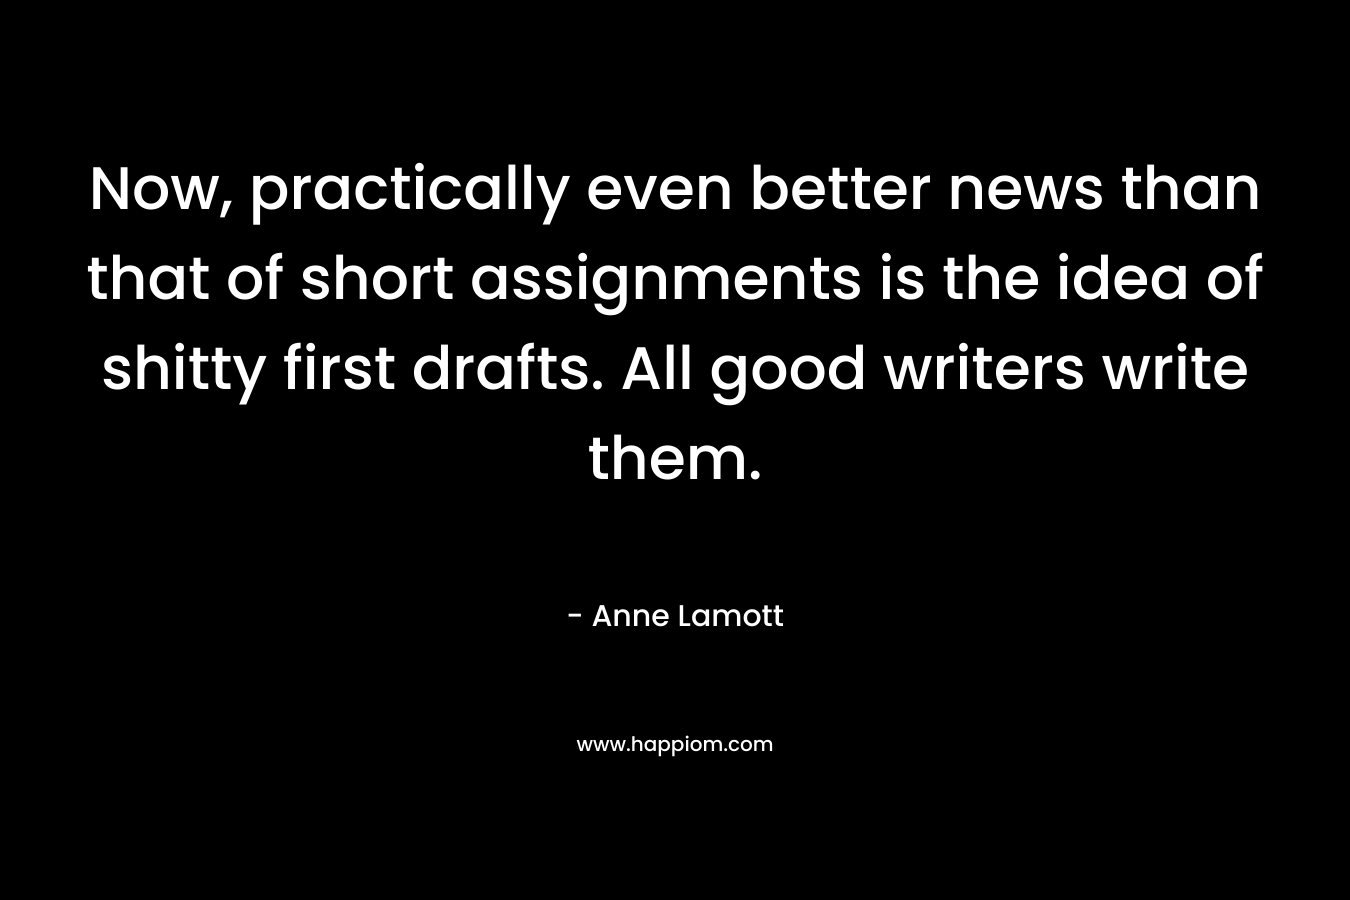 Now, practically even better news than that of short assignments is the idea of shitty first drafts. All good writers write them. – Anne Lamott